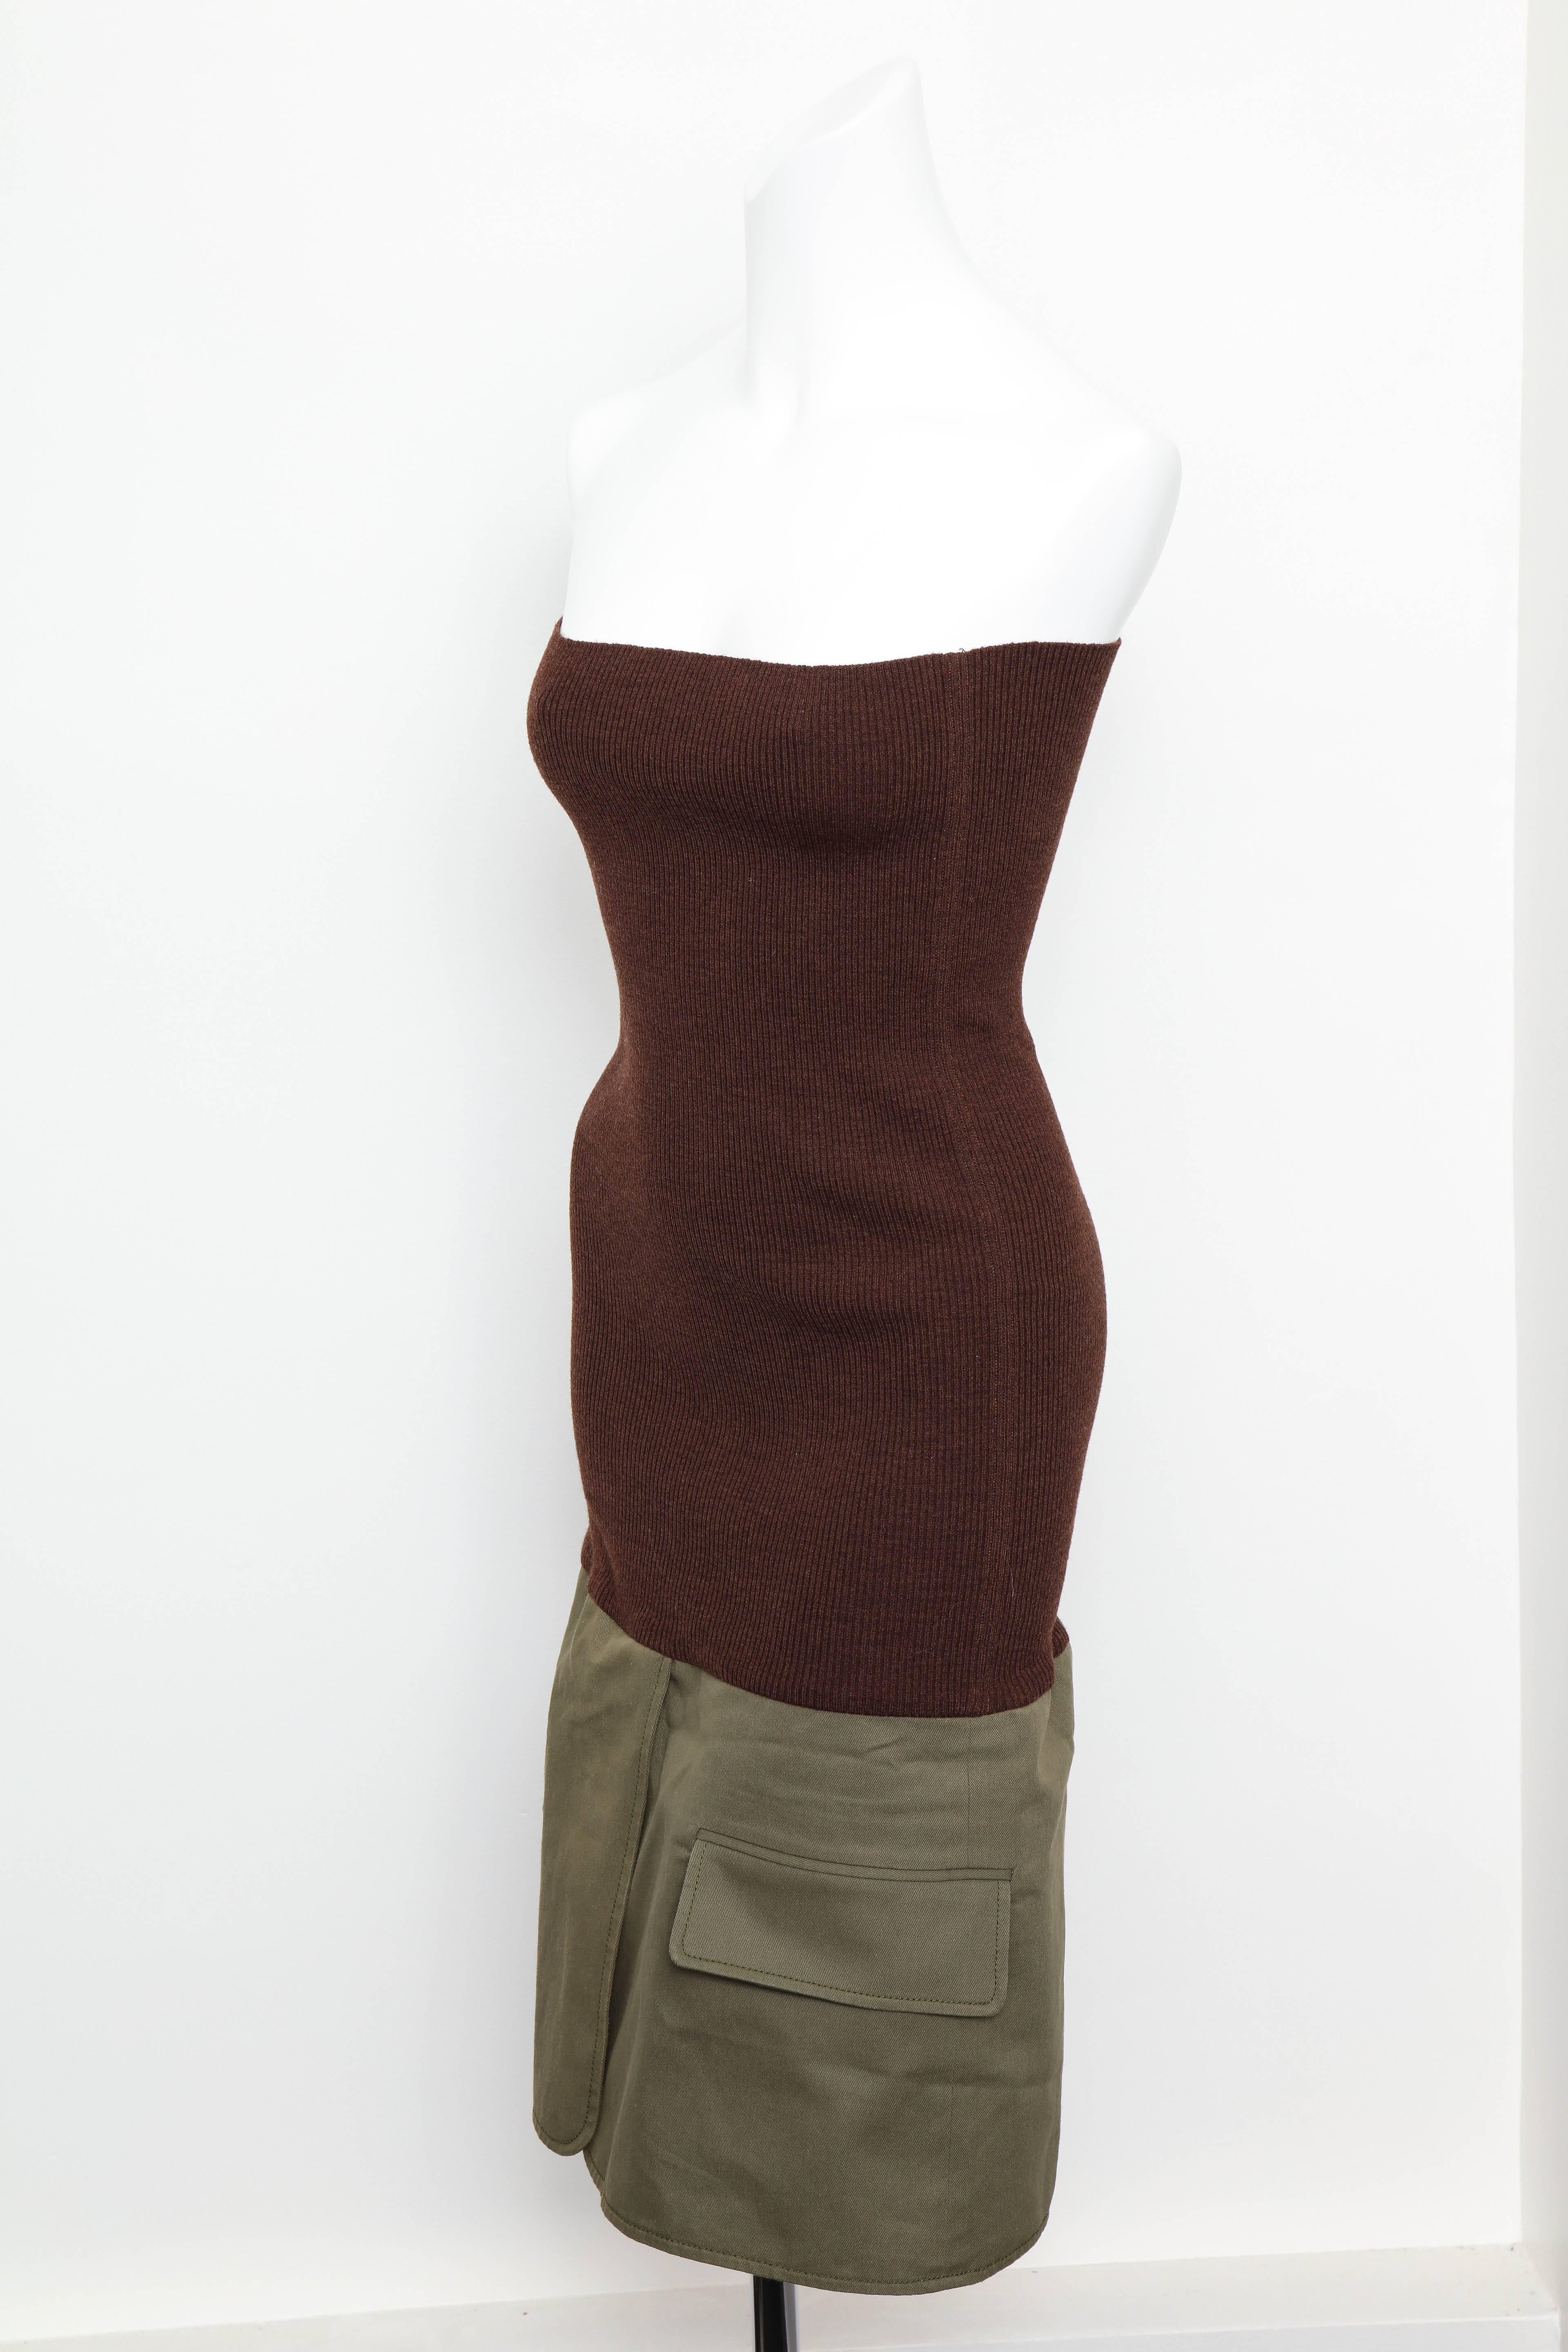 Christian Dior by John Galliano Knit Tube Dress For Sale 1